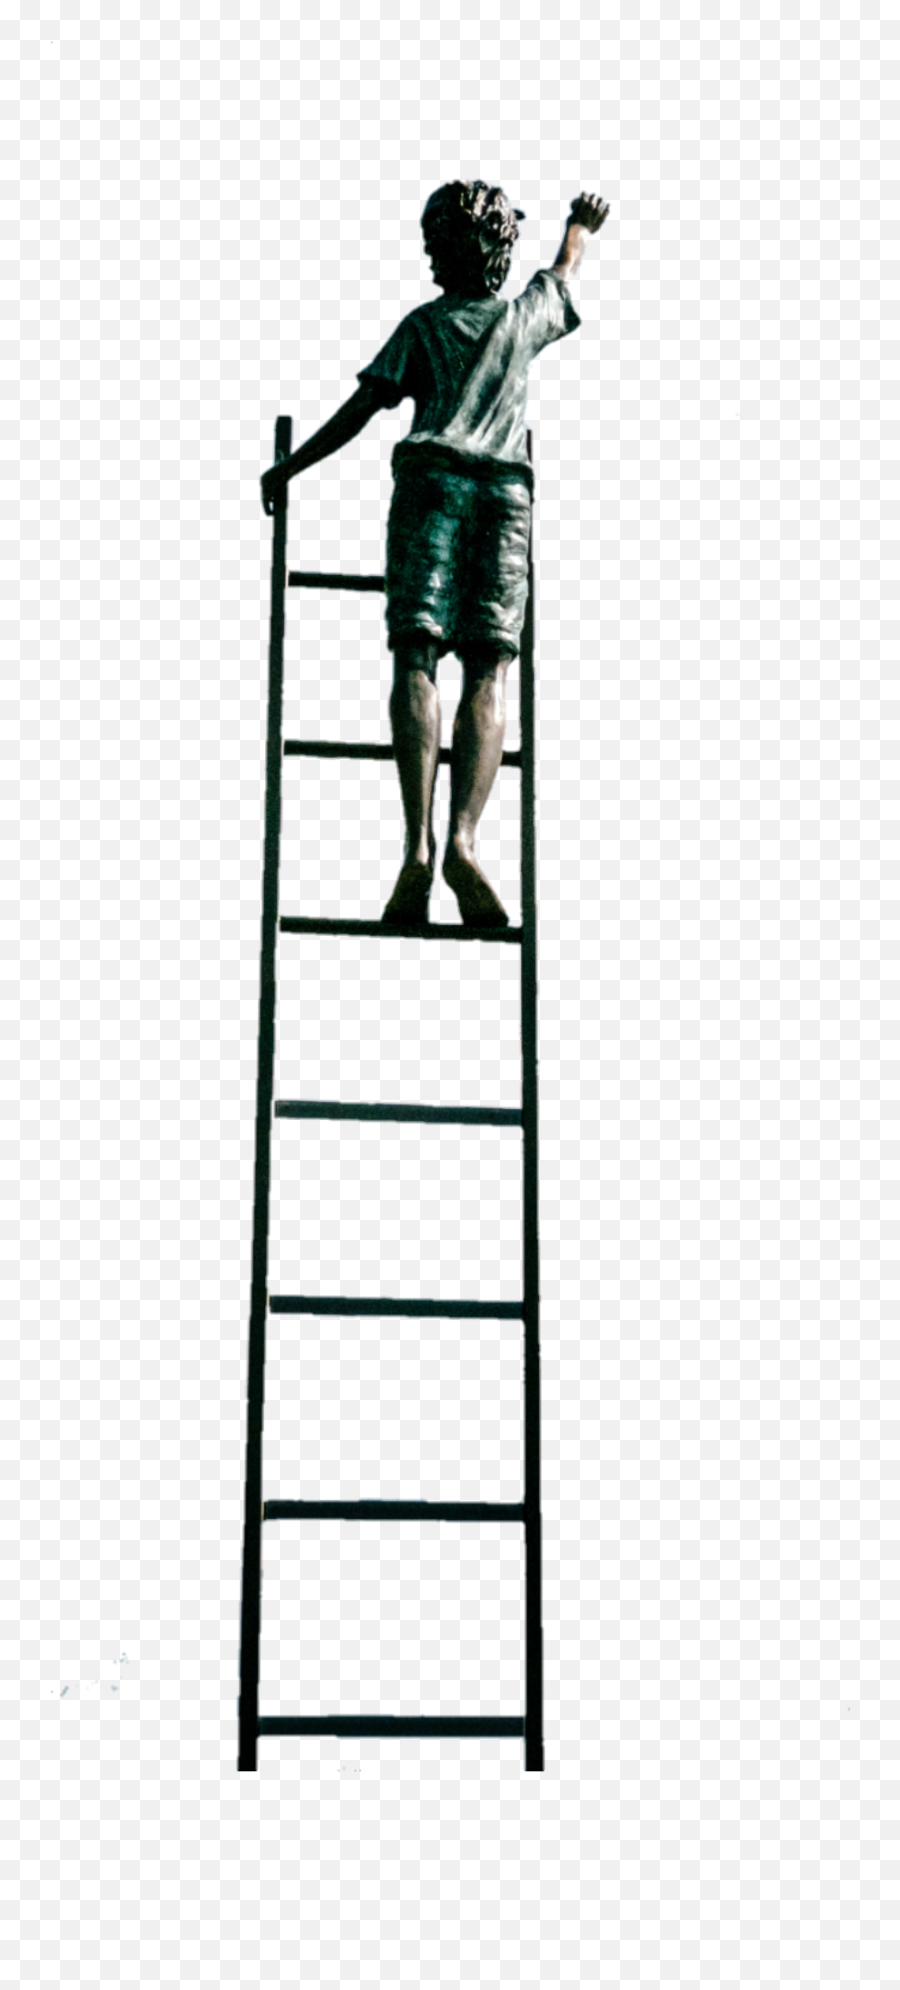 Boy Ladder - Sticker By Annelies If Tears Could Build A Stairway And Memories A Lane I D Walk Right Up To Heaven And Bring You Home Again Png,Ladder Png